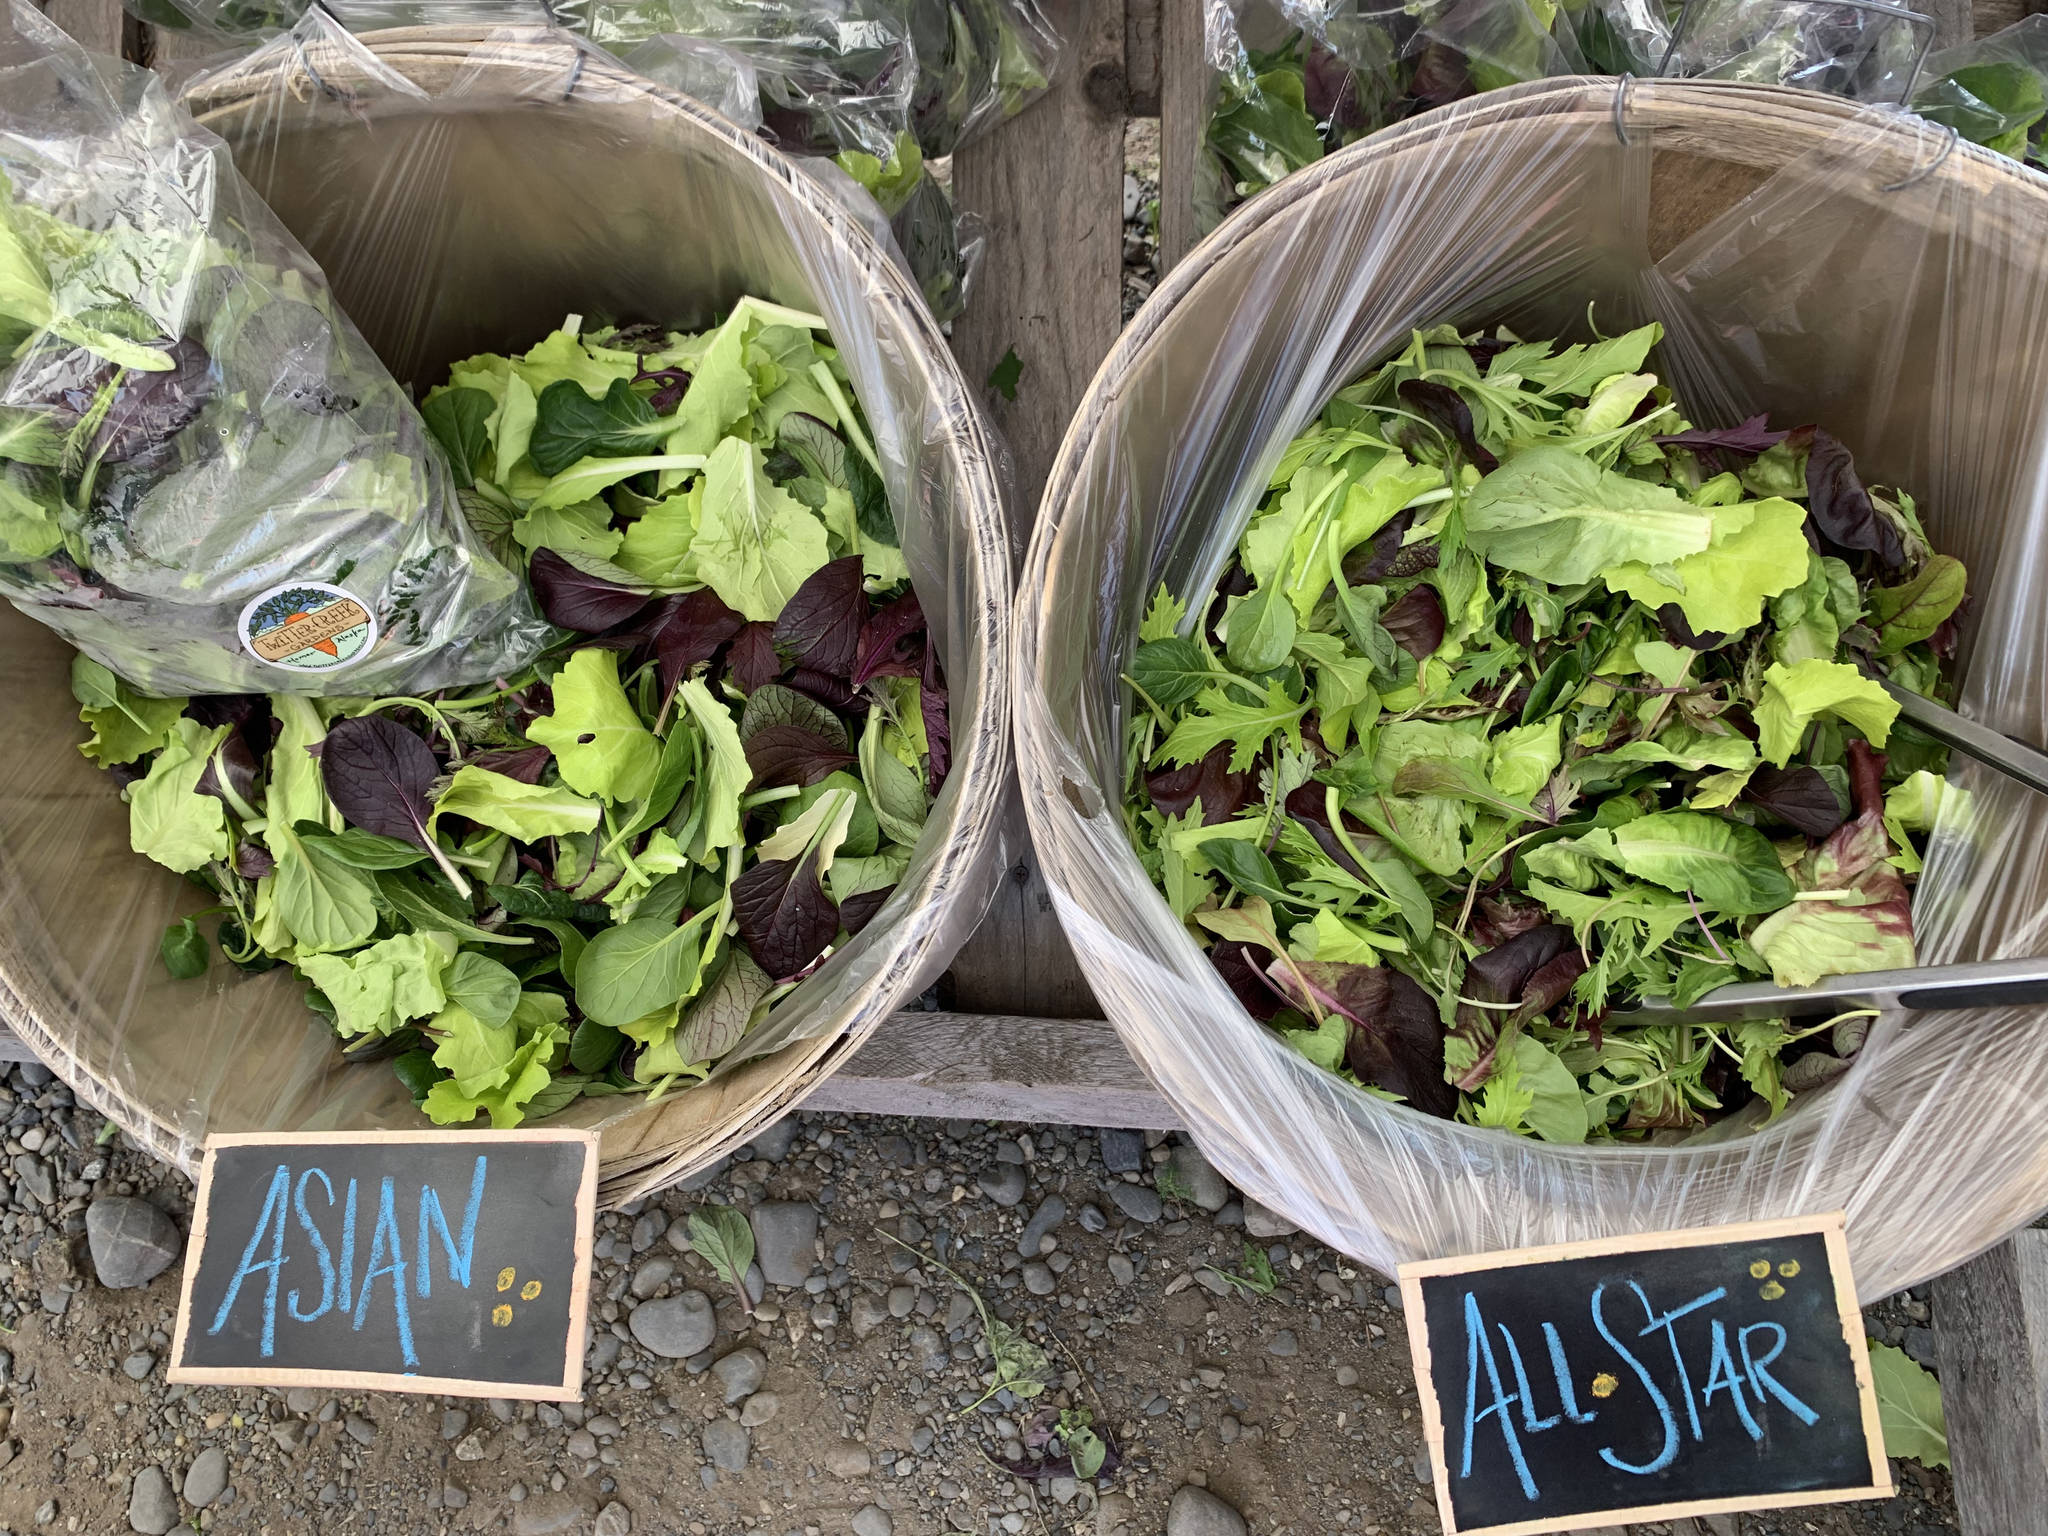 Twitter Creek Gardens offers a variety of fresh salad mixes at the June 29, 2019, Homer Farmers Market in Homer, Alaska. (Photo by Sydney Leto)